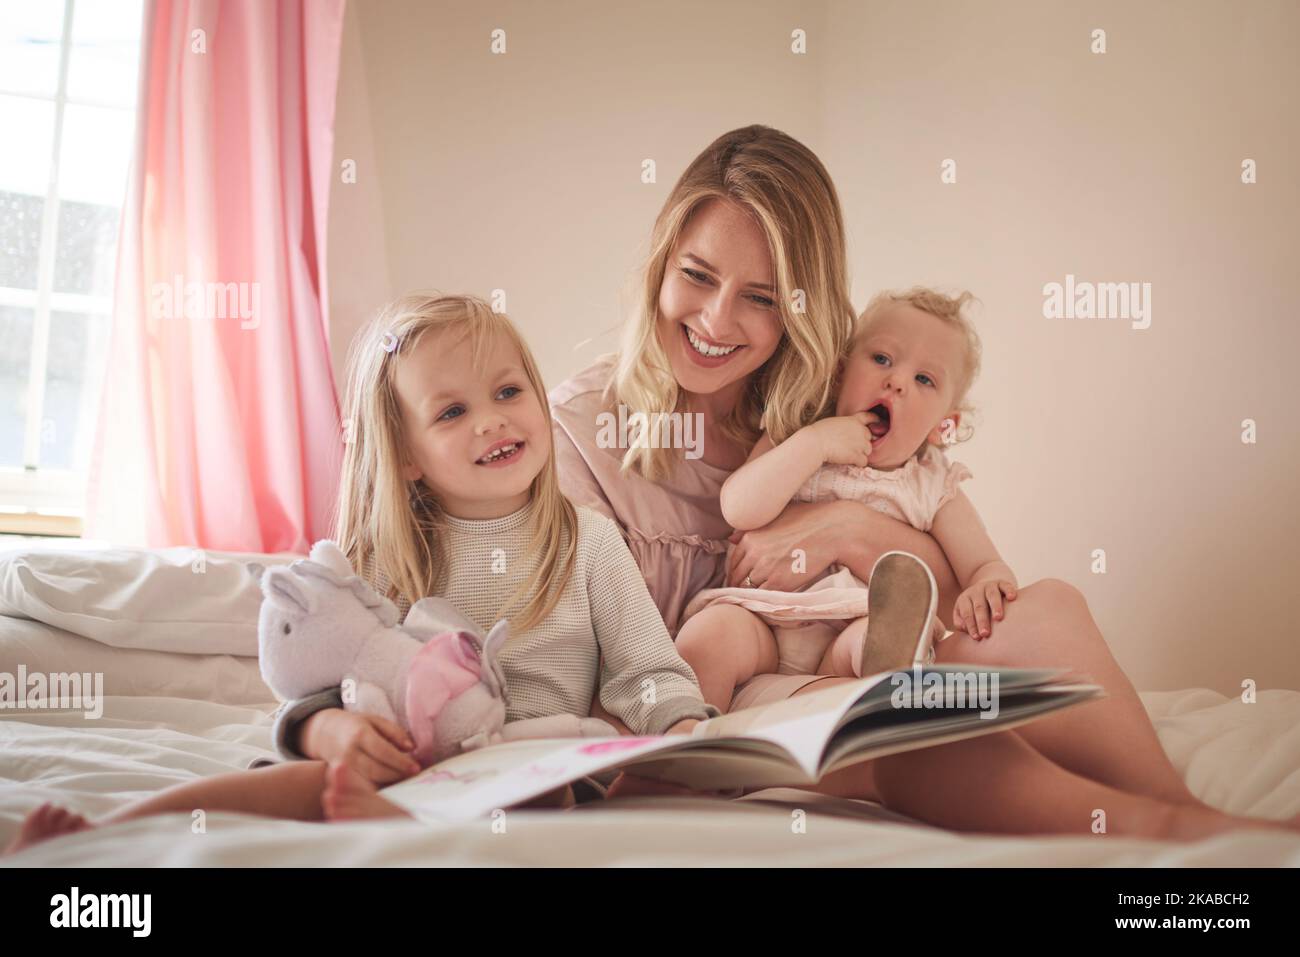 Its a time to learn and a time to bond. an adorable family of three reading a book together on the bed at home. Stock Photo